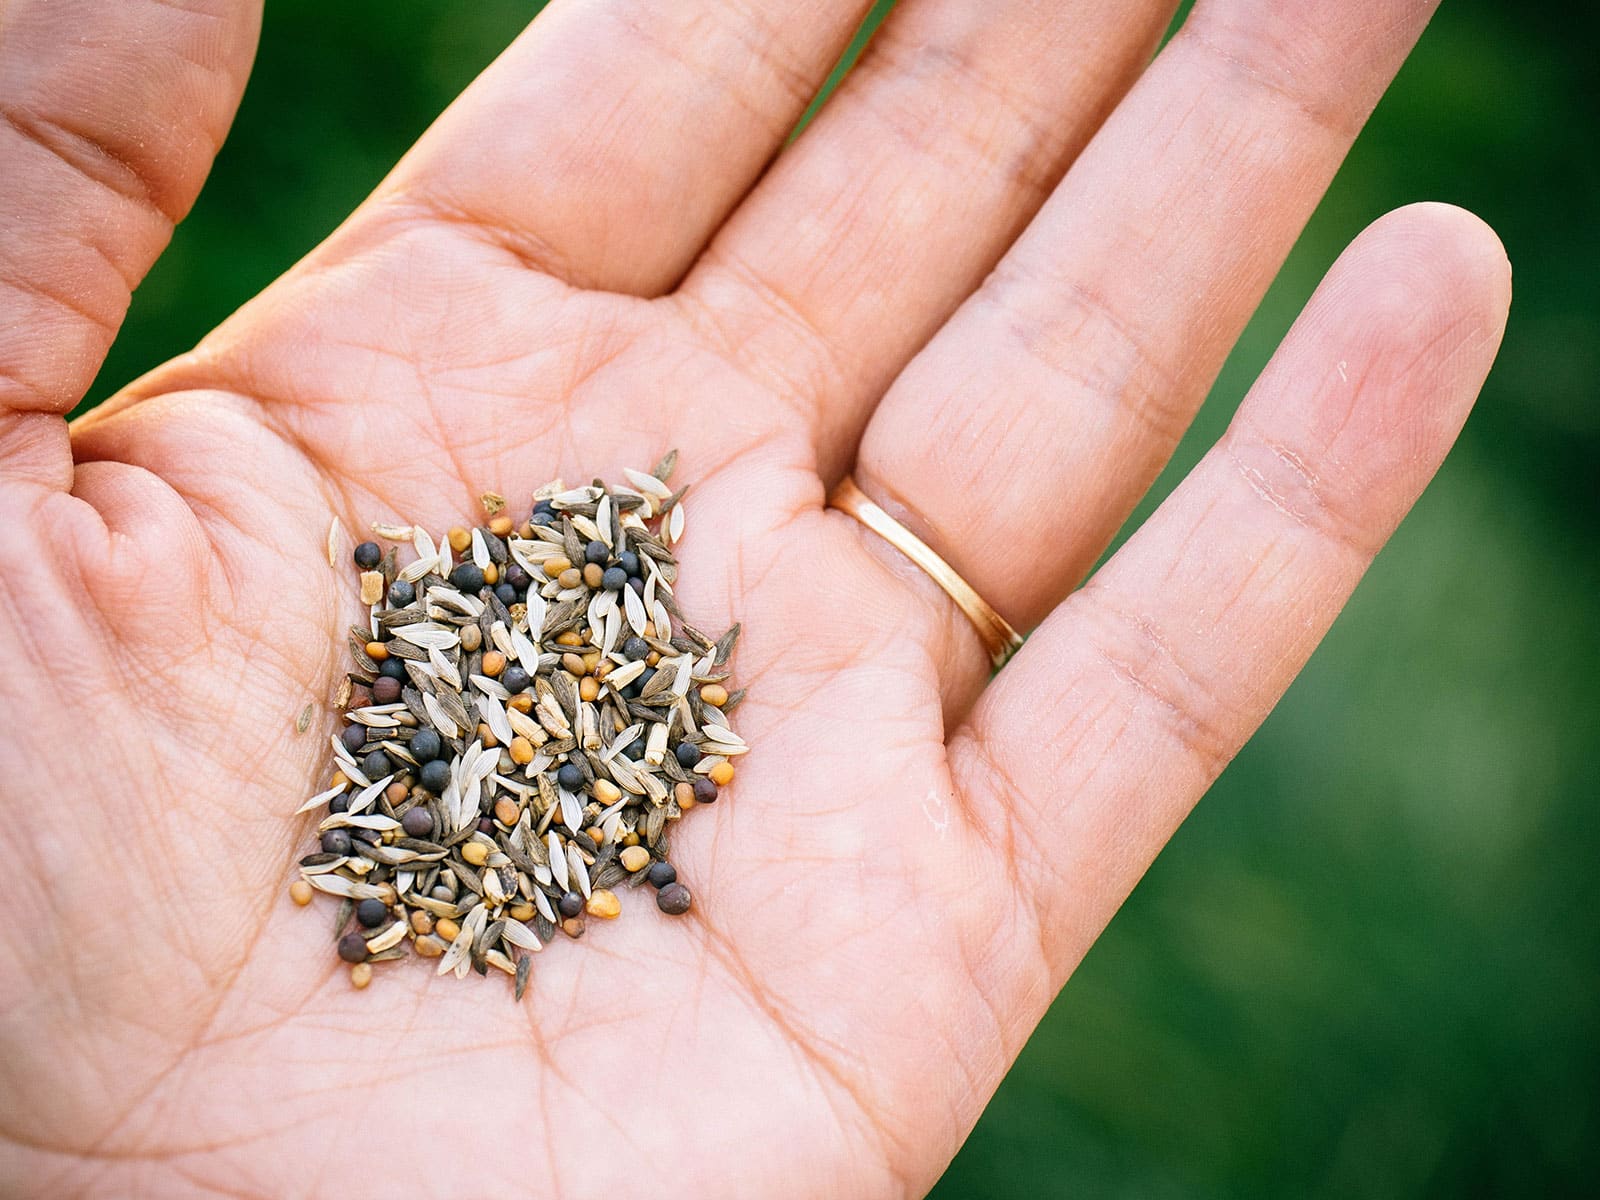 Hand holding a mixed pile of small seeds